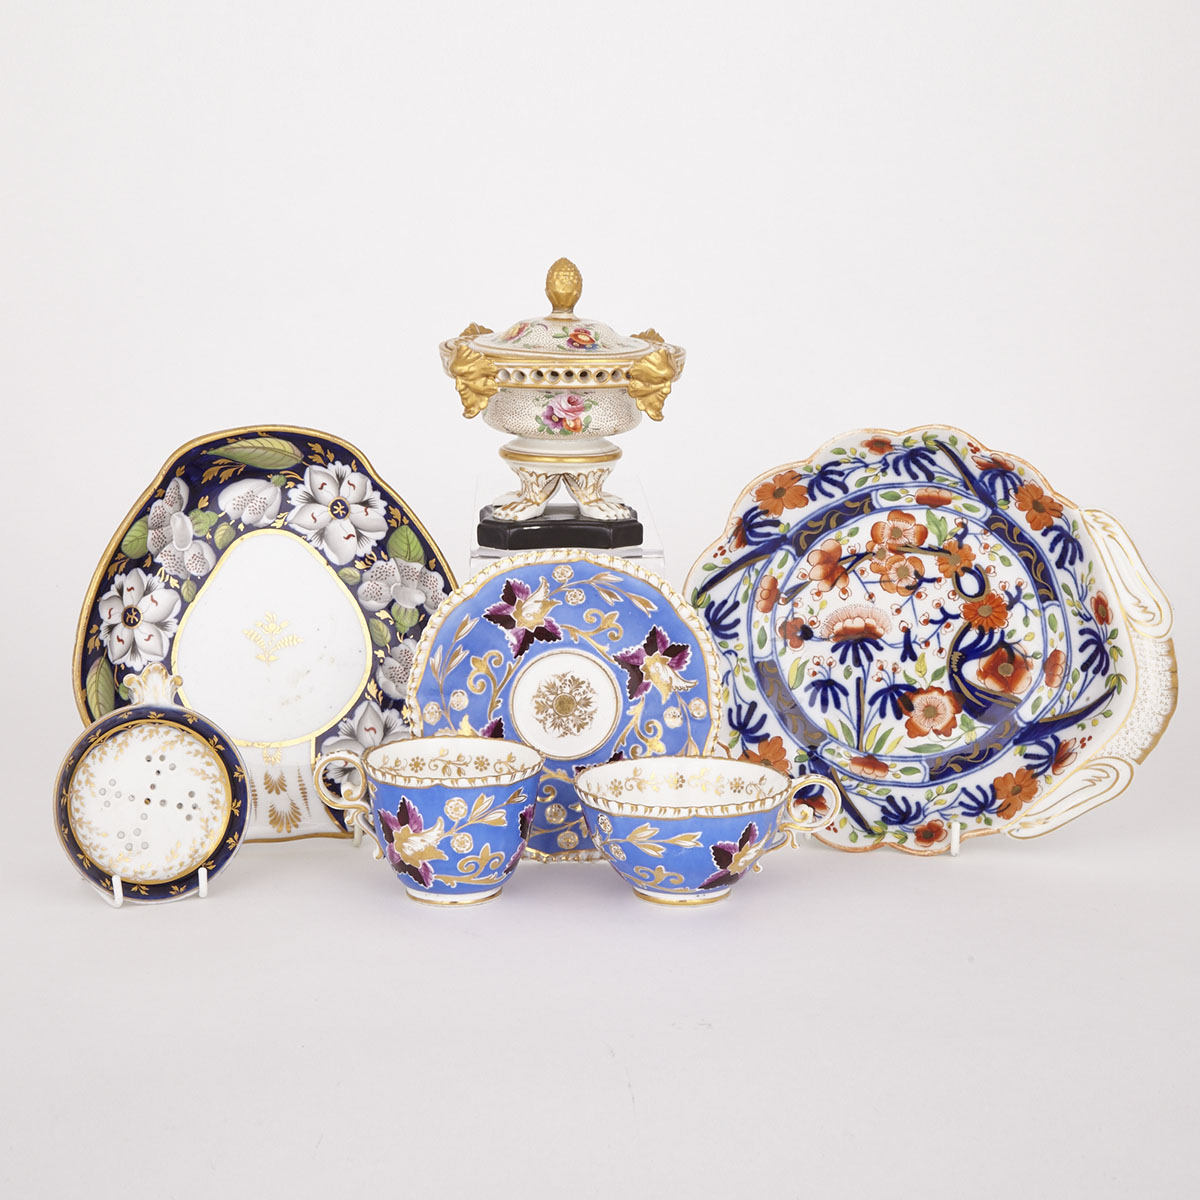 Group of English Porcelain Table Articles, late 18th/19th century